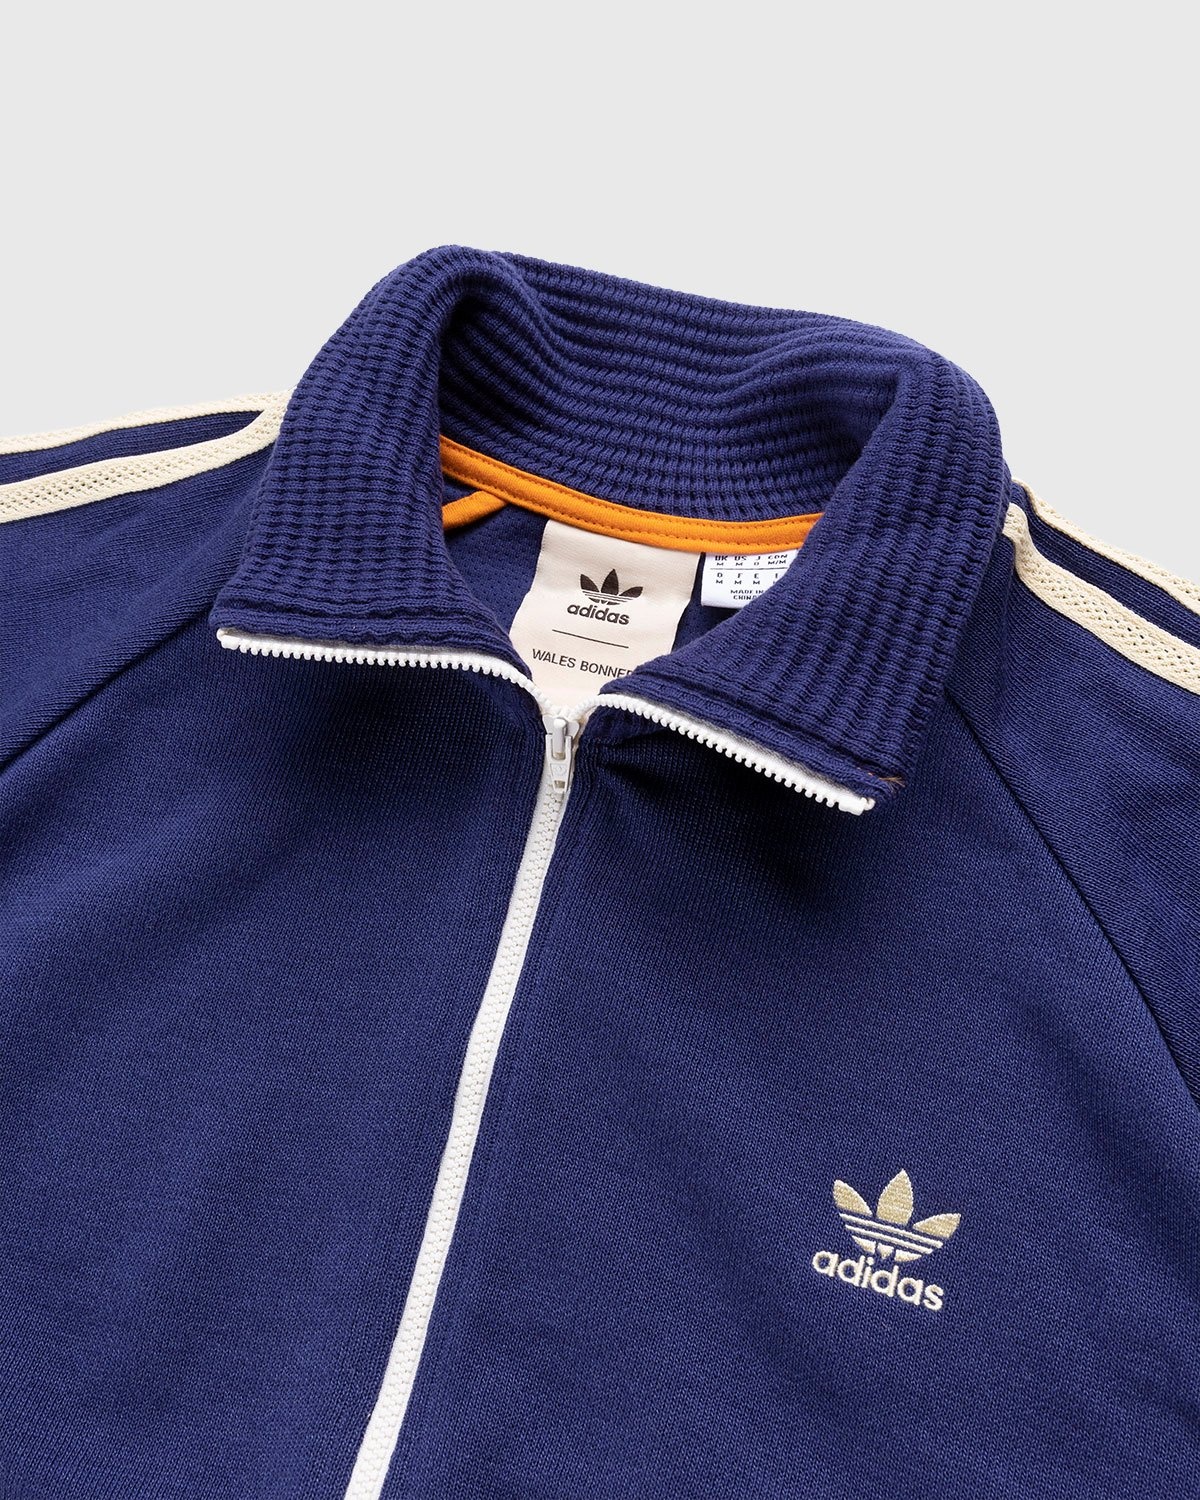 adidas Originals by Wales Bonner 80s Track Tops Night Sky